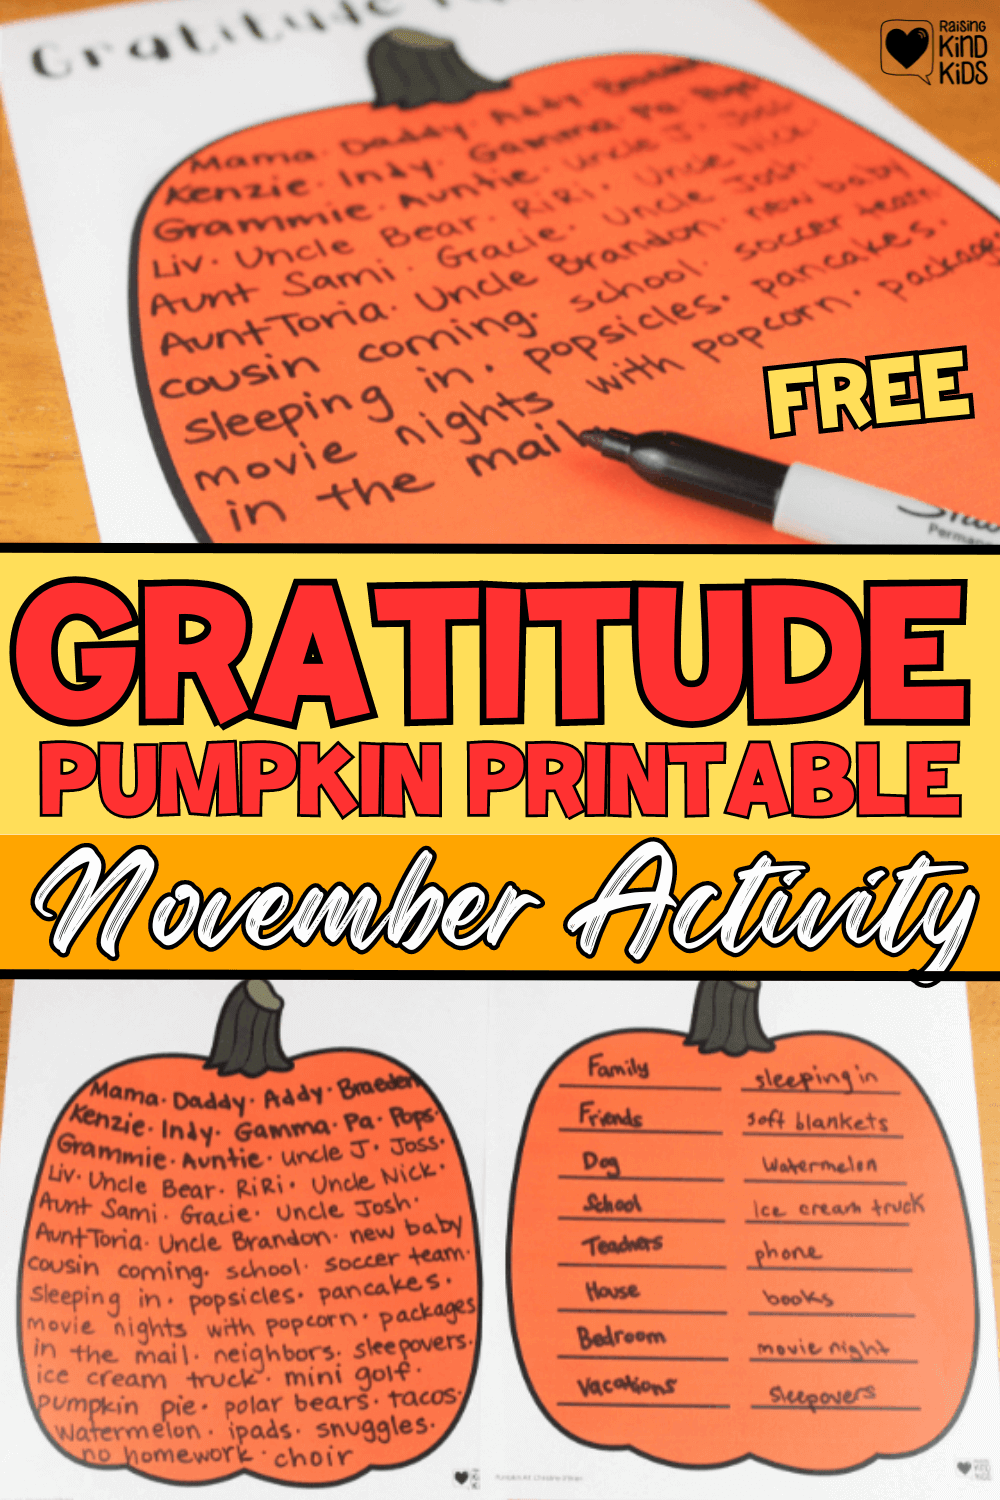 The best and most meaningful Thanksgiving Gratitude Activities to help families focus on what they're really thankful for this November. #thanksgivingactivities #thanksgivingactivities #thanksgivinggratitude #gratitudeactivities #thankfulactivities #bestofthanksgiving #kidsthanksgiving #coffeeandcarpool #teachingkidstobegrateful #kidstobegrateful